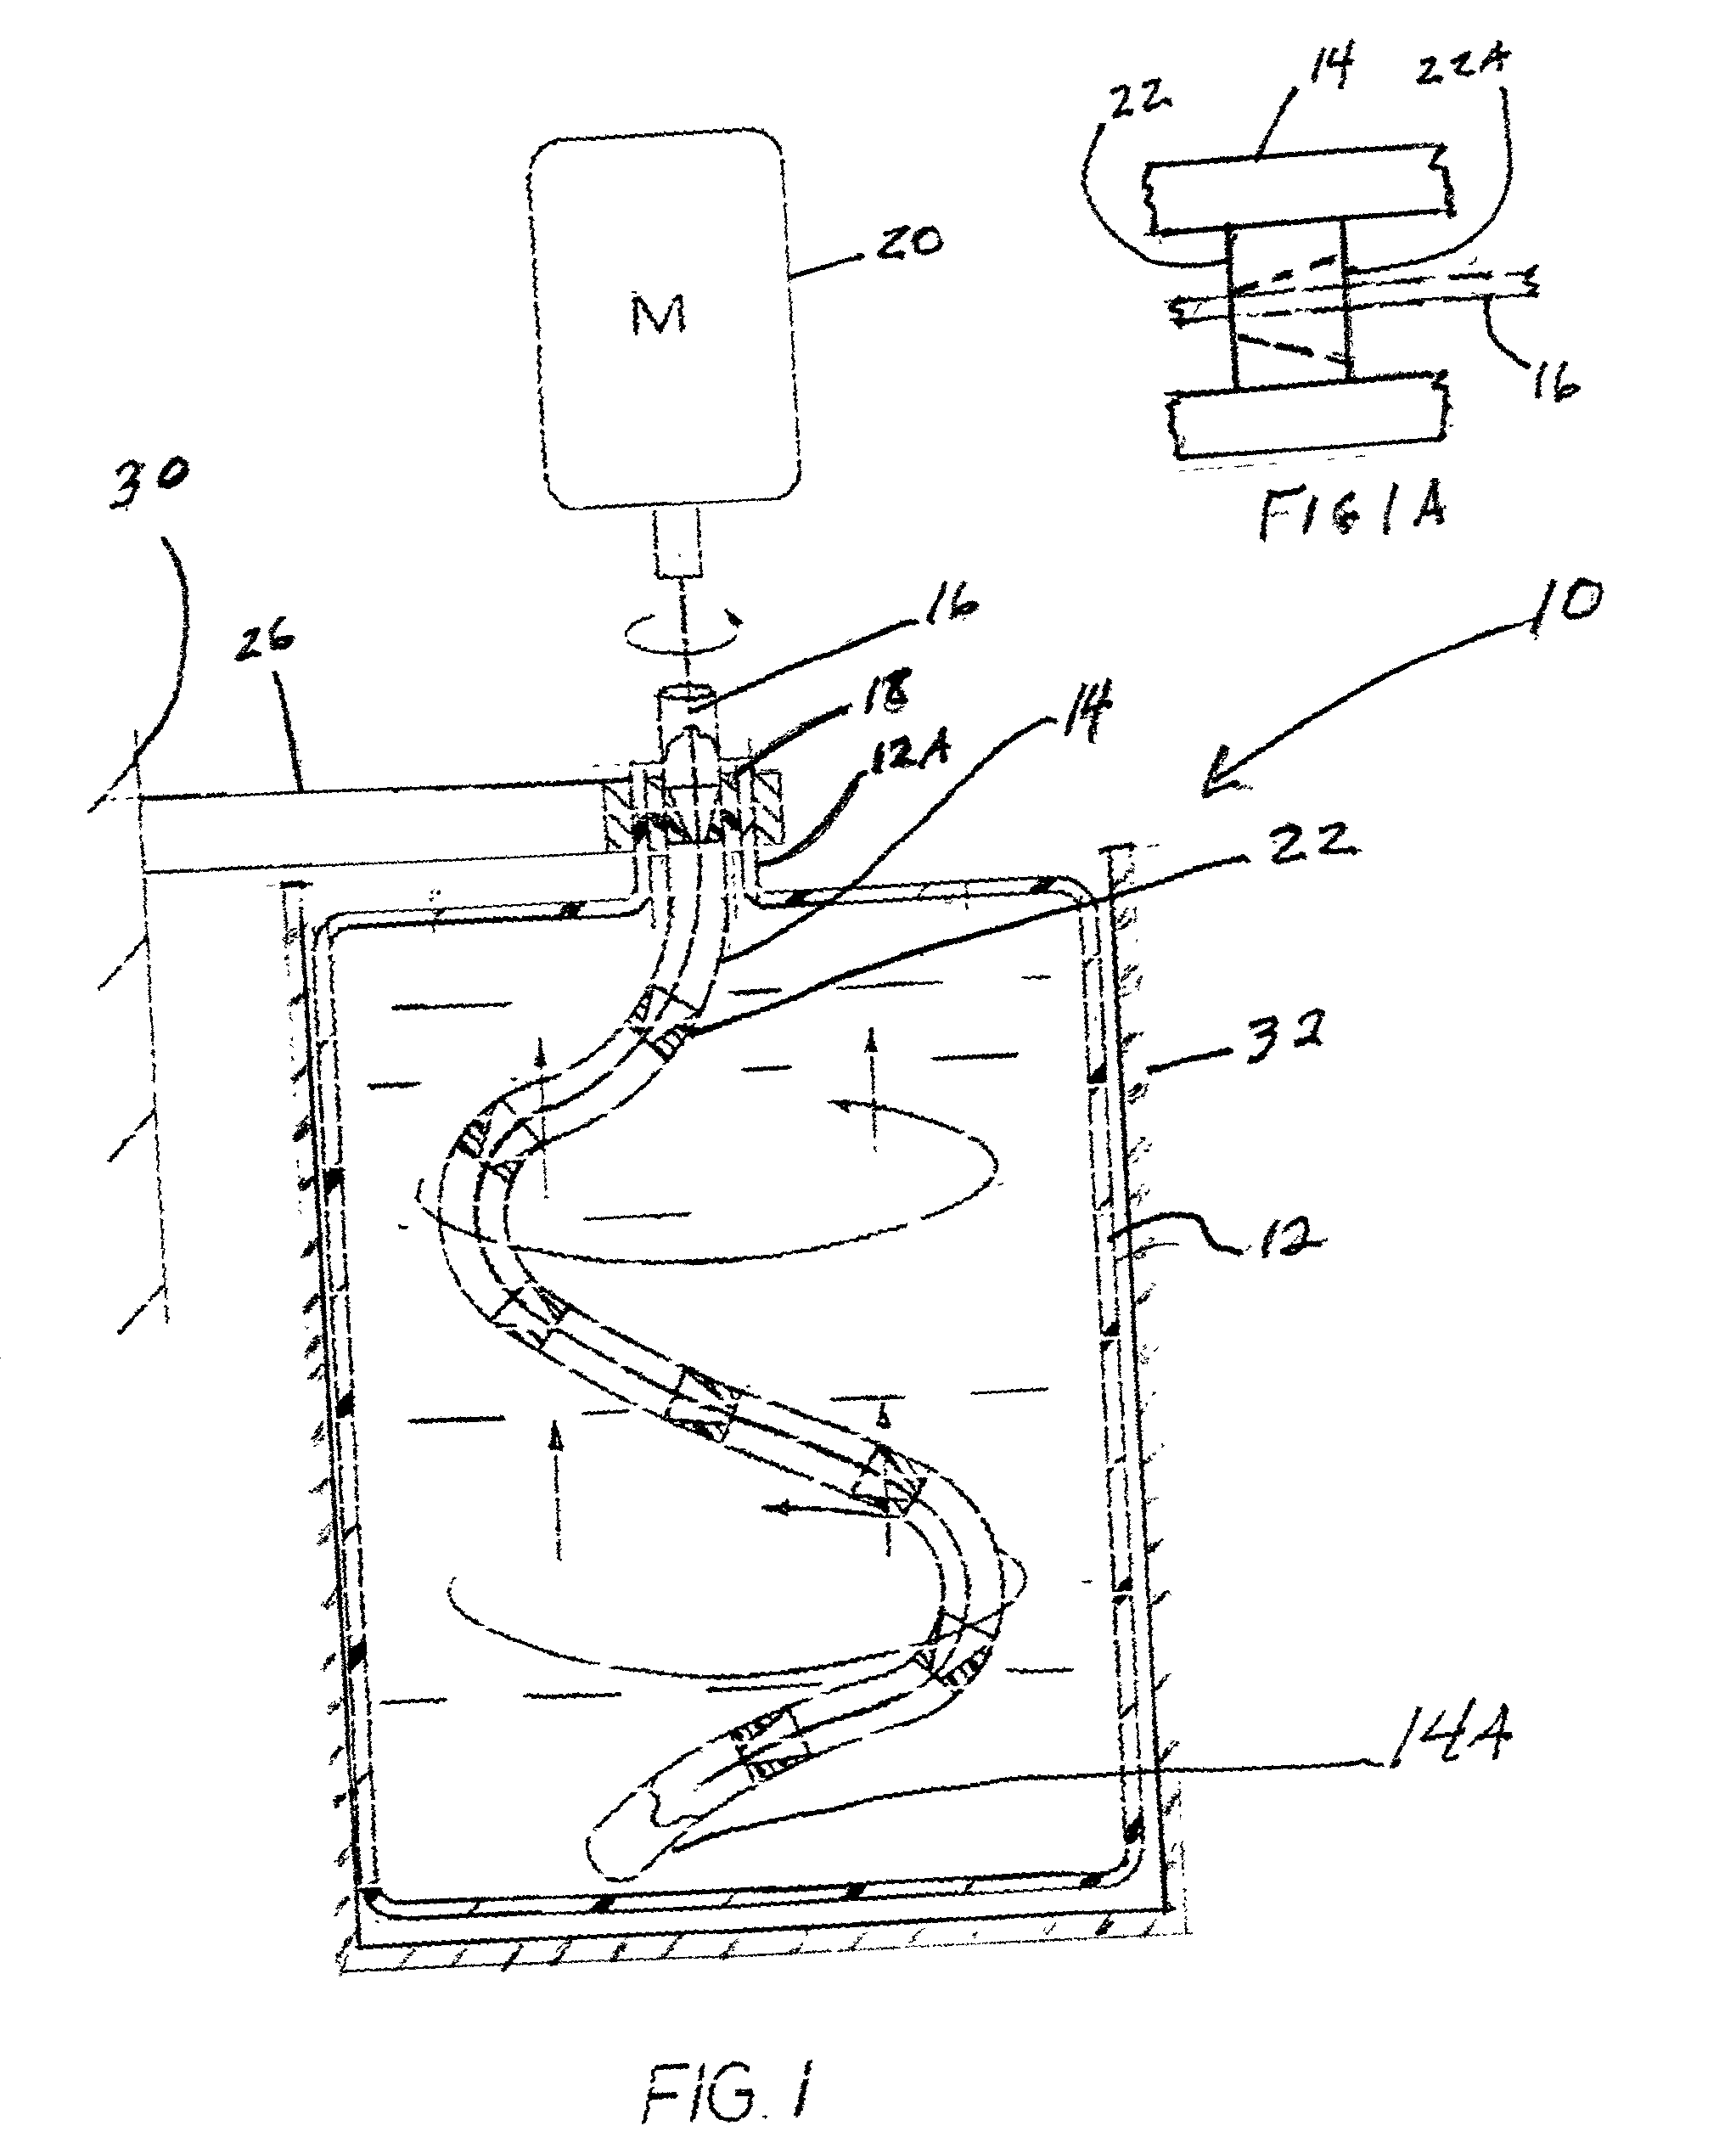 Apparatus and method for mixing materials sealed in a container under sterile conditions